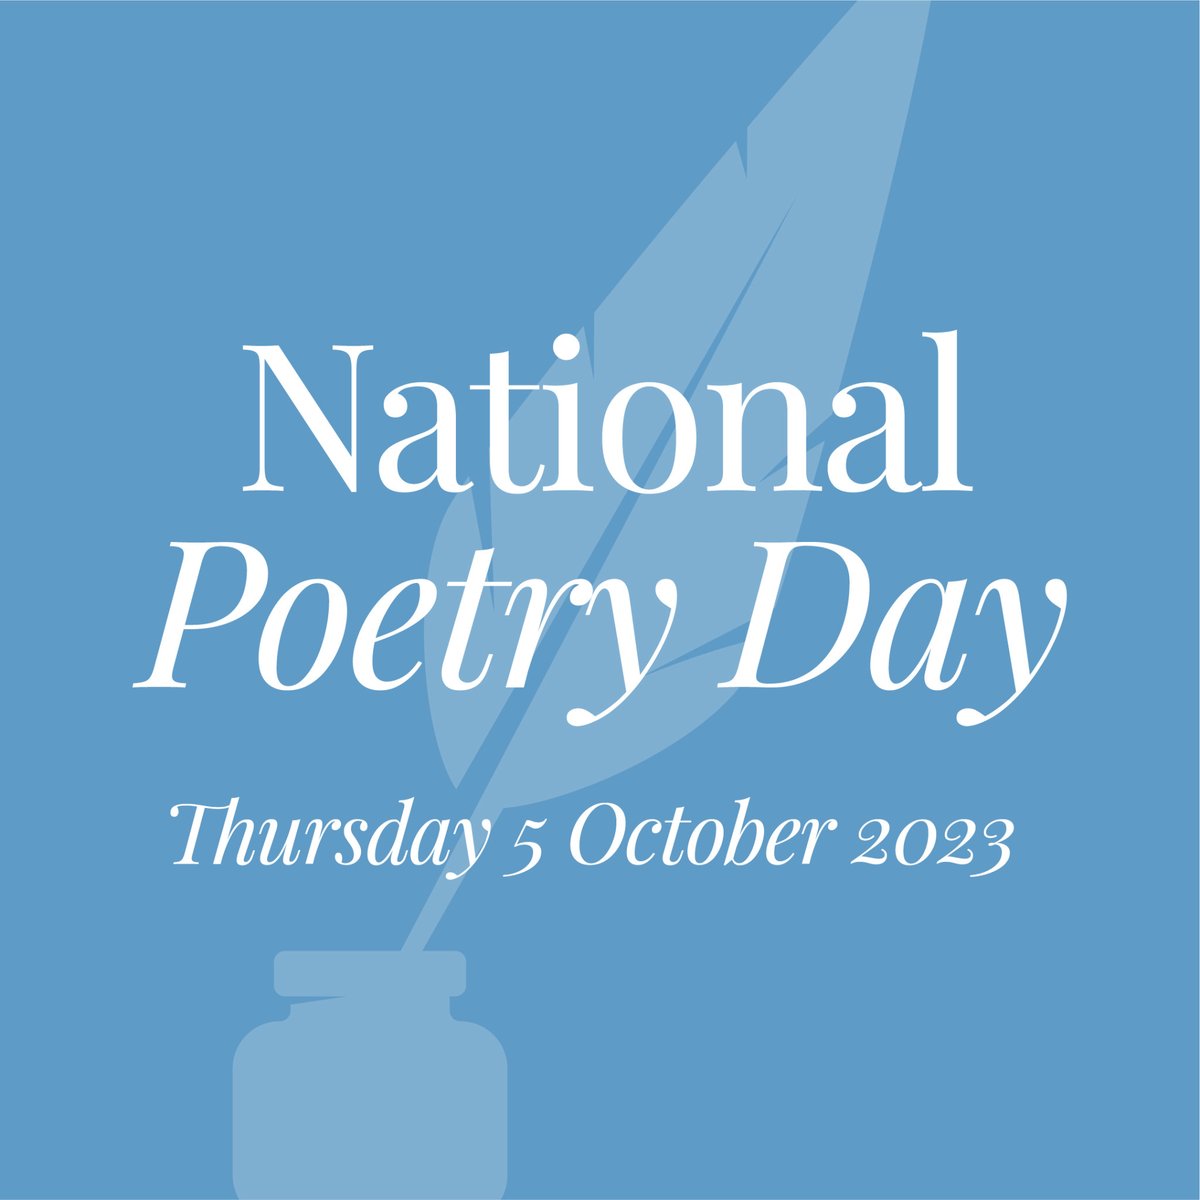 Happy National Poetry Day! 

We're proud to celebrate the power of language and the beauty of verse. 

#NationalPoetryDay #YoungWriters #CreativeWriting